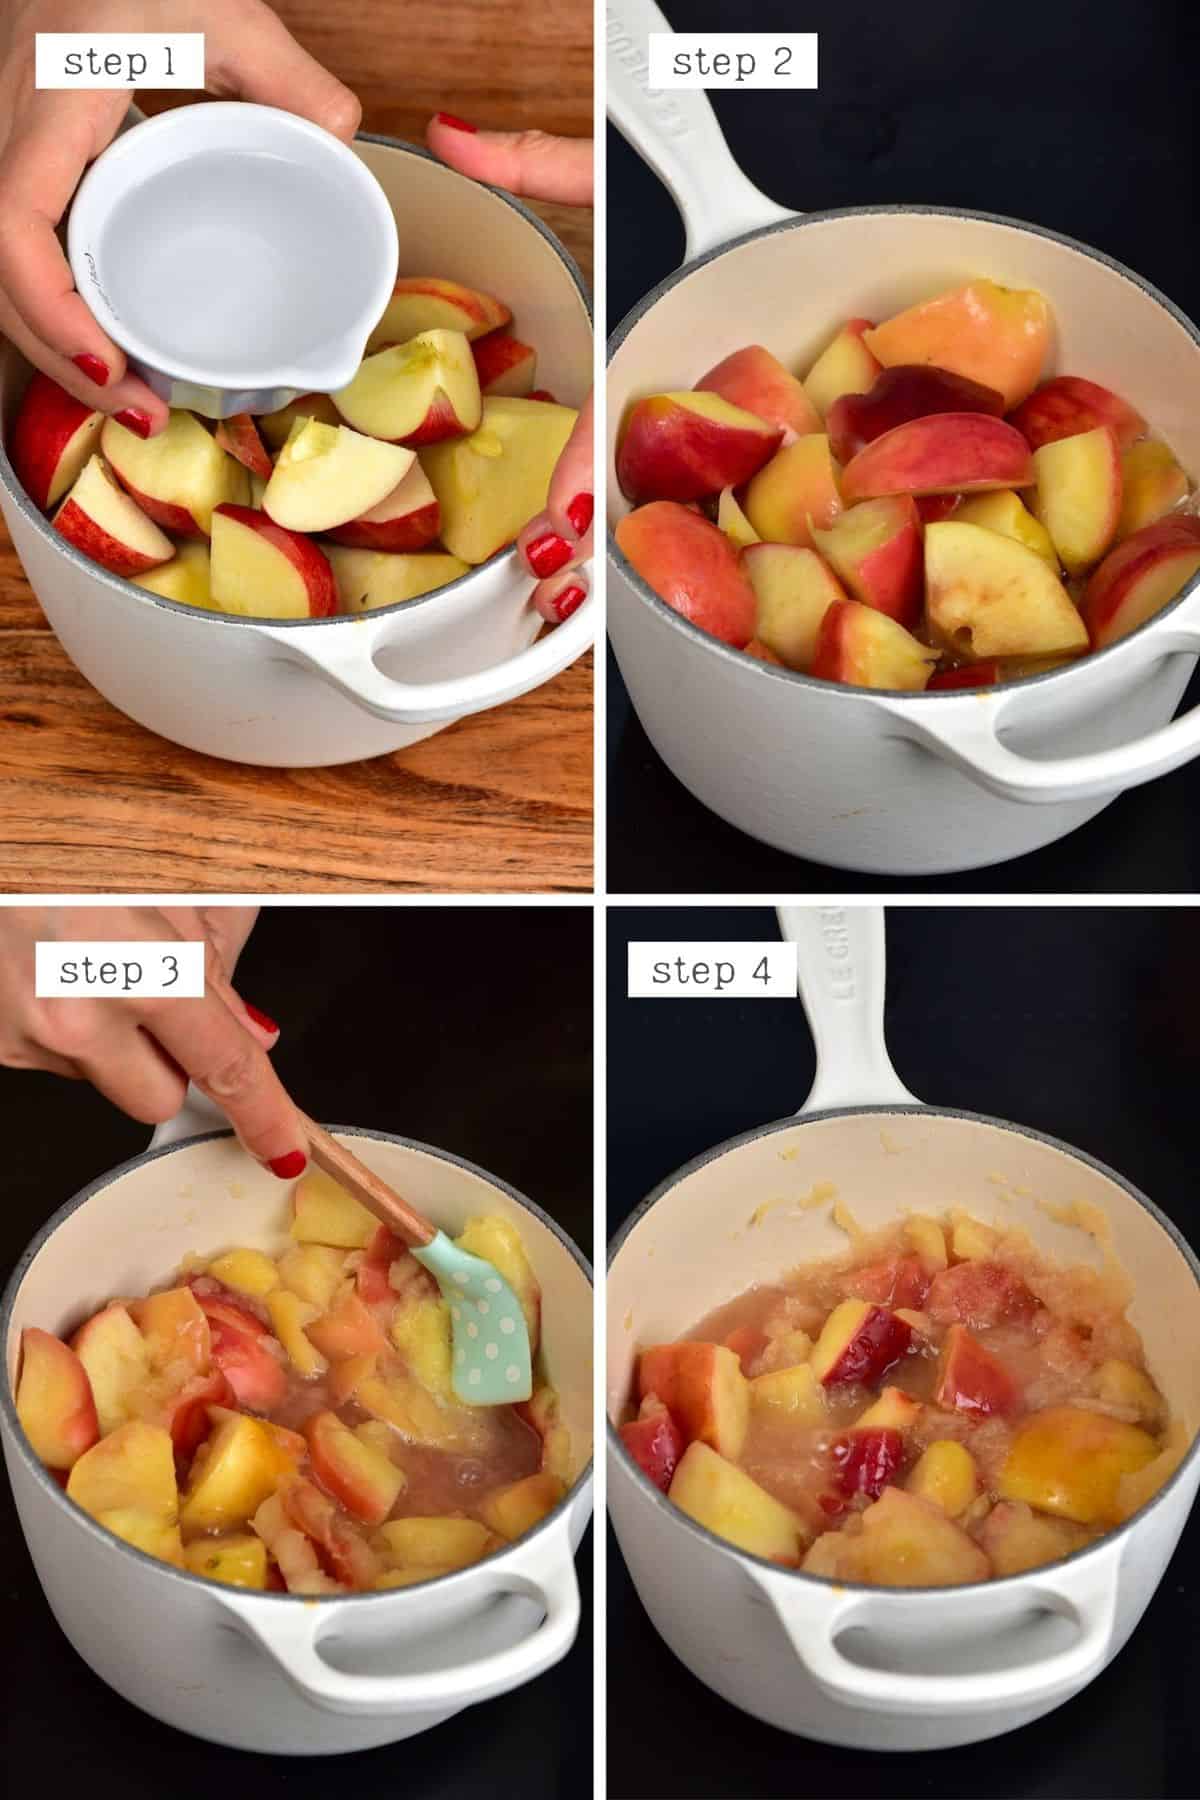 Steps for cooking apples